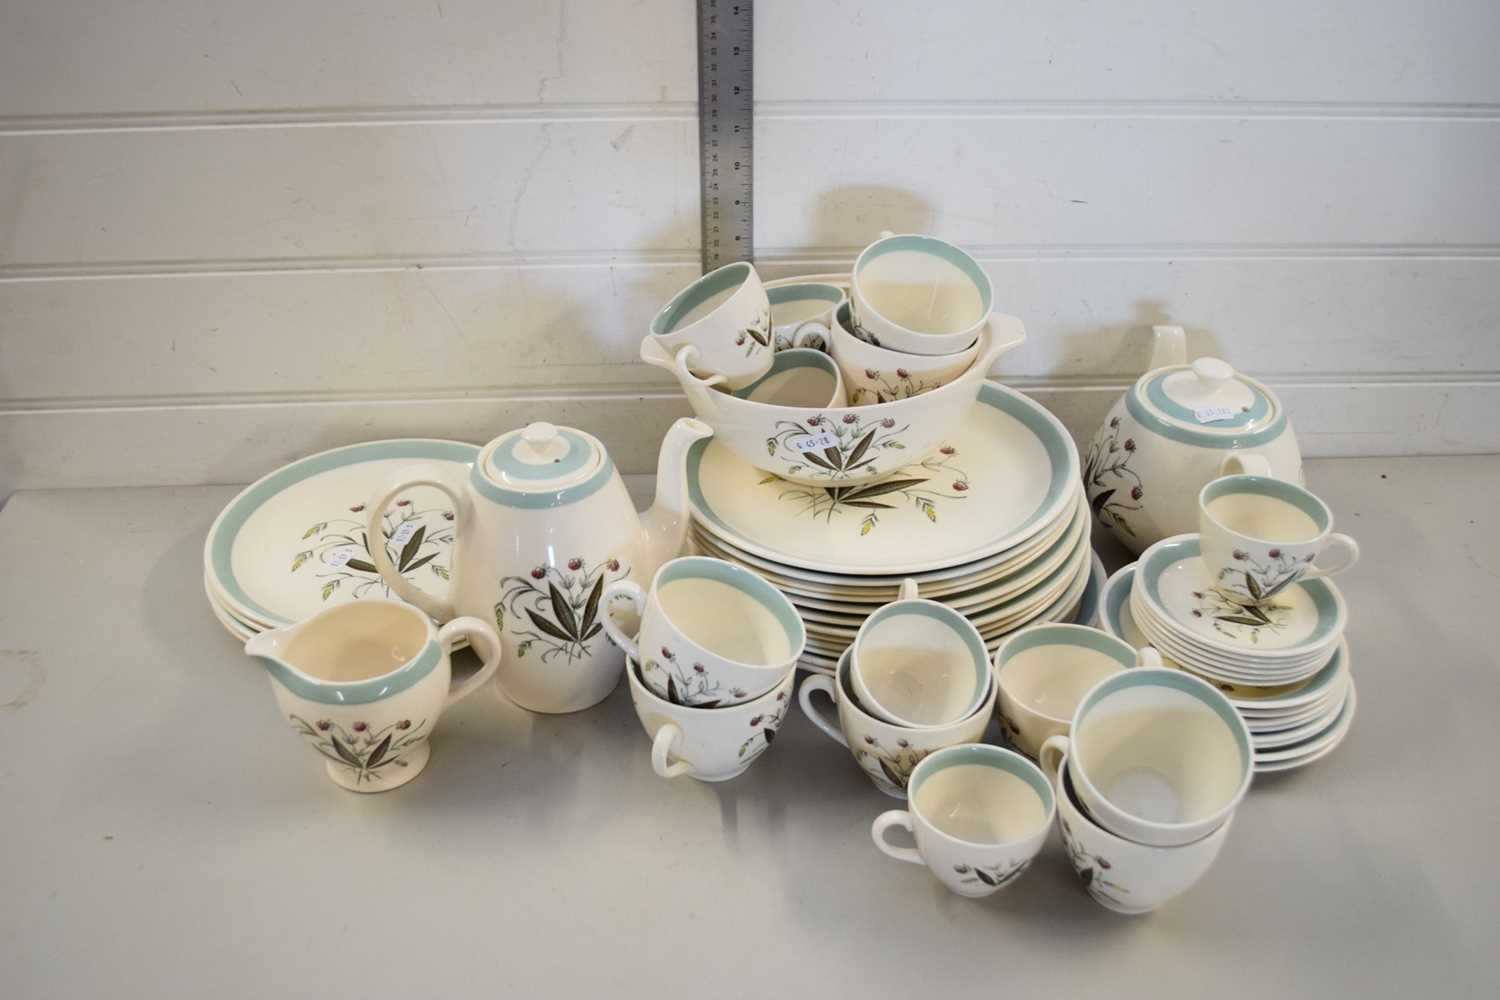 QUANTITY OF ALFRED MEAKIN HEDGEROW PATTERN TABLE WARES